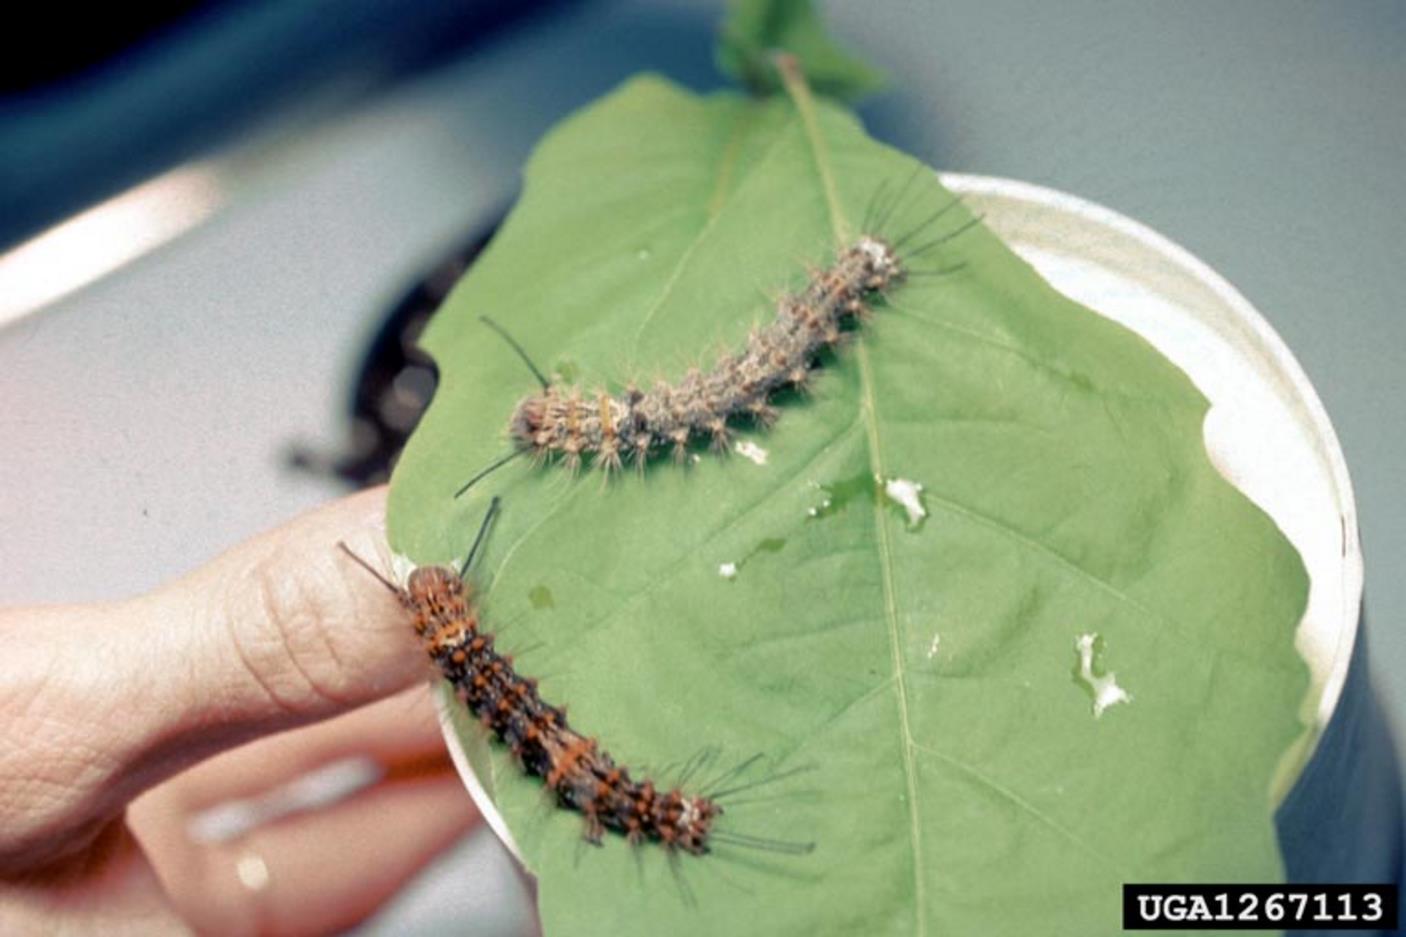 Two pink gypsy moth larvae on a leaf showing variation in colour from black and orange to grey and yellow